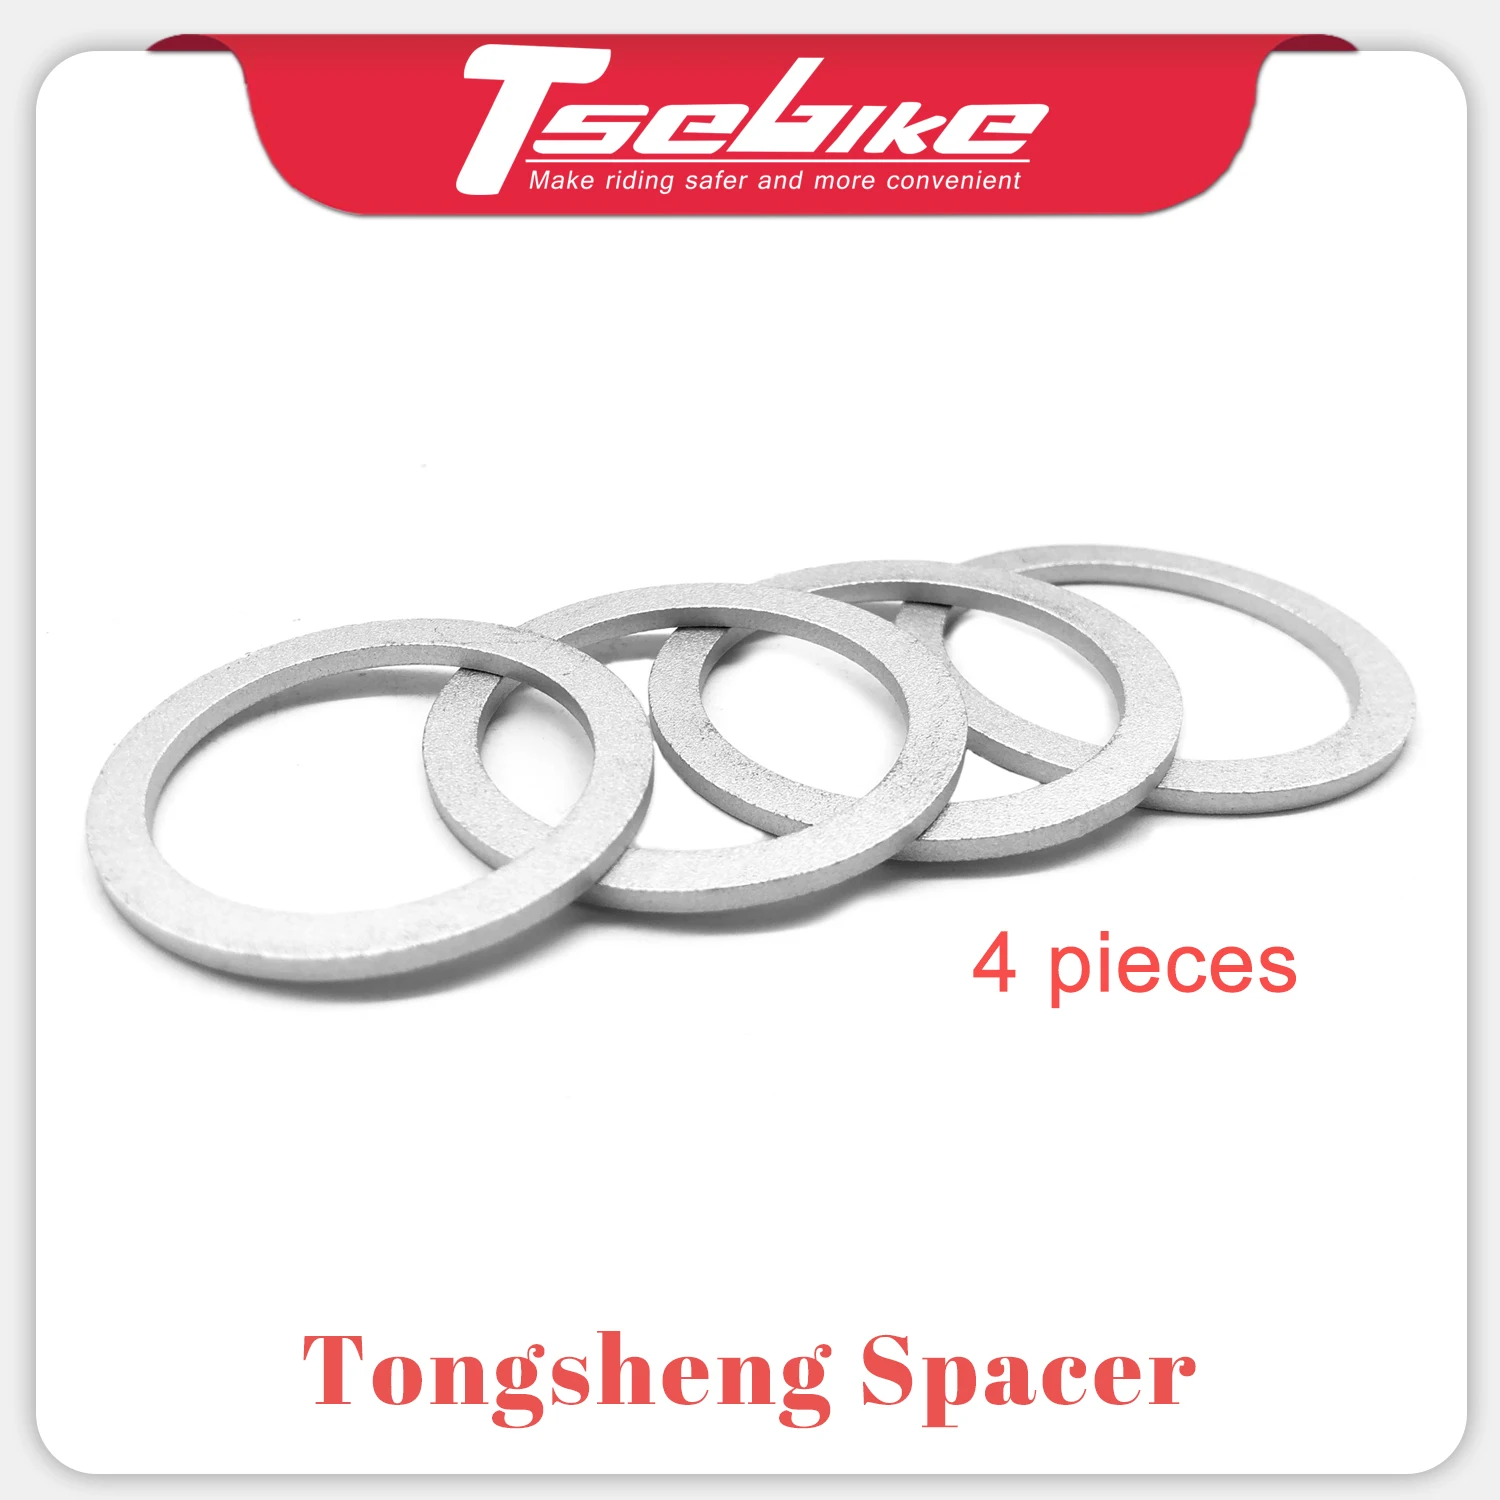 

Tongsheng Spacer 4 Pieces 9.6mm Ebike Conversion Parts For TSDZ 2 Mid Motor Bottom Bracket Fitting